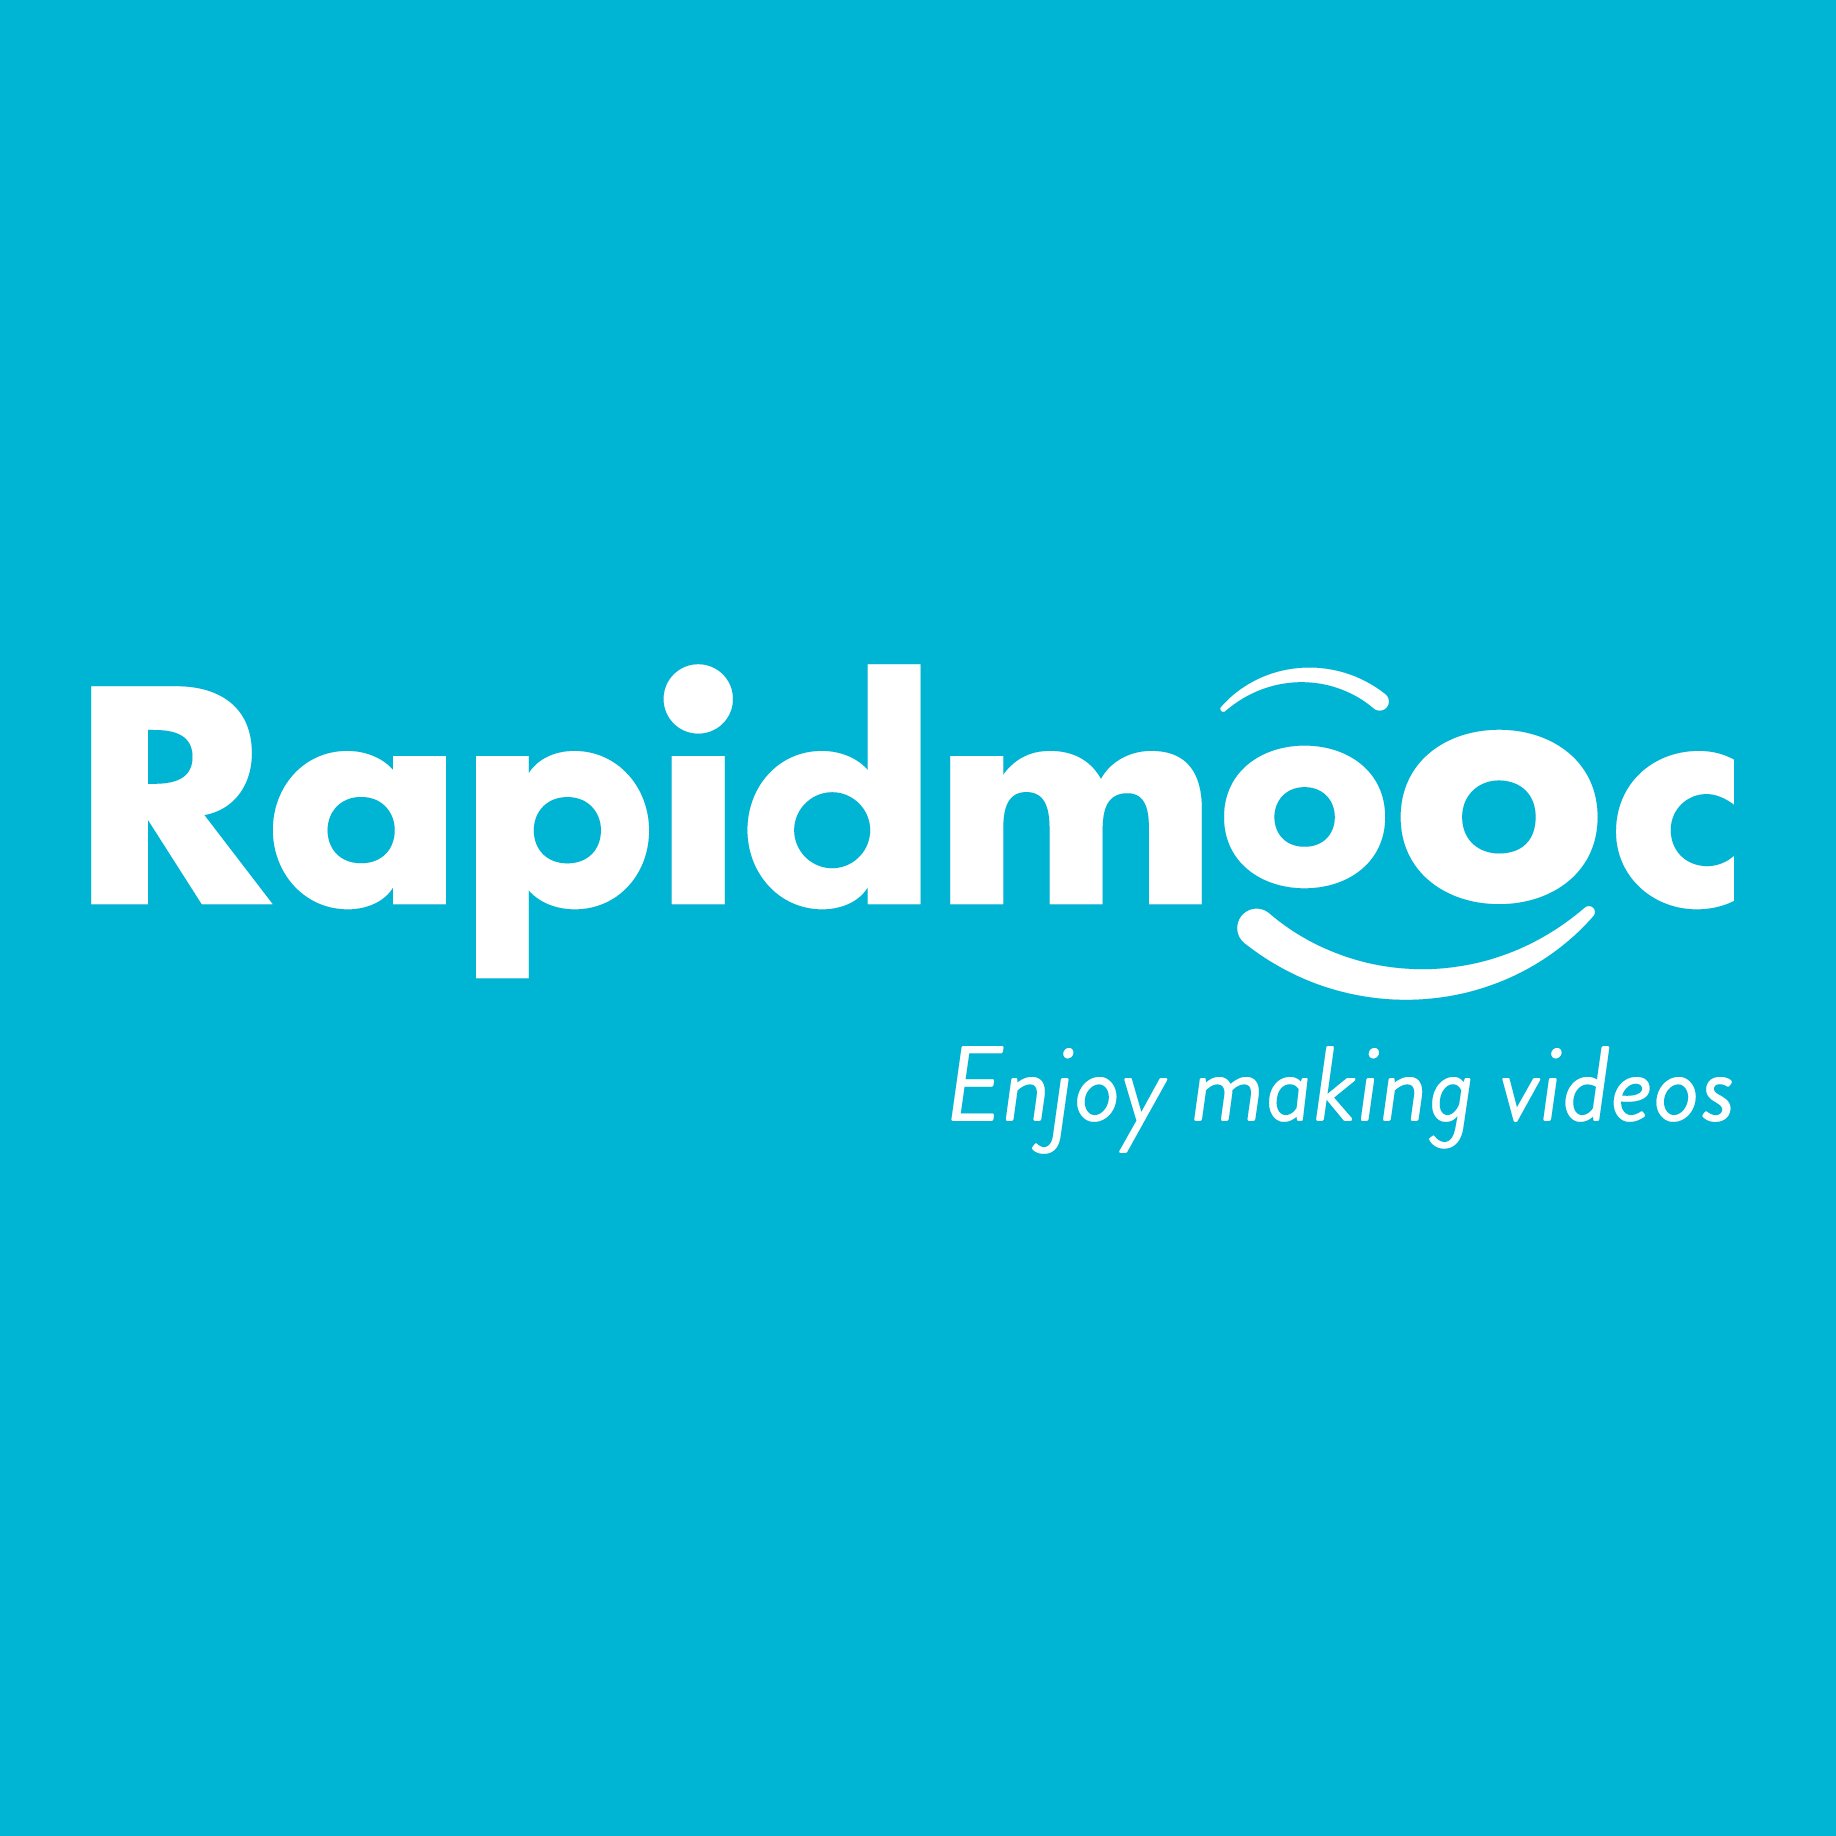 Rapidmooc produces self-serve video booths letting anyone make professional quality videos in minutes with no specialist skills or post-production needed.